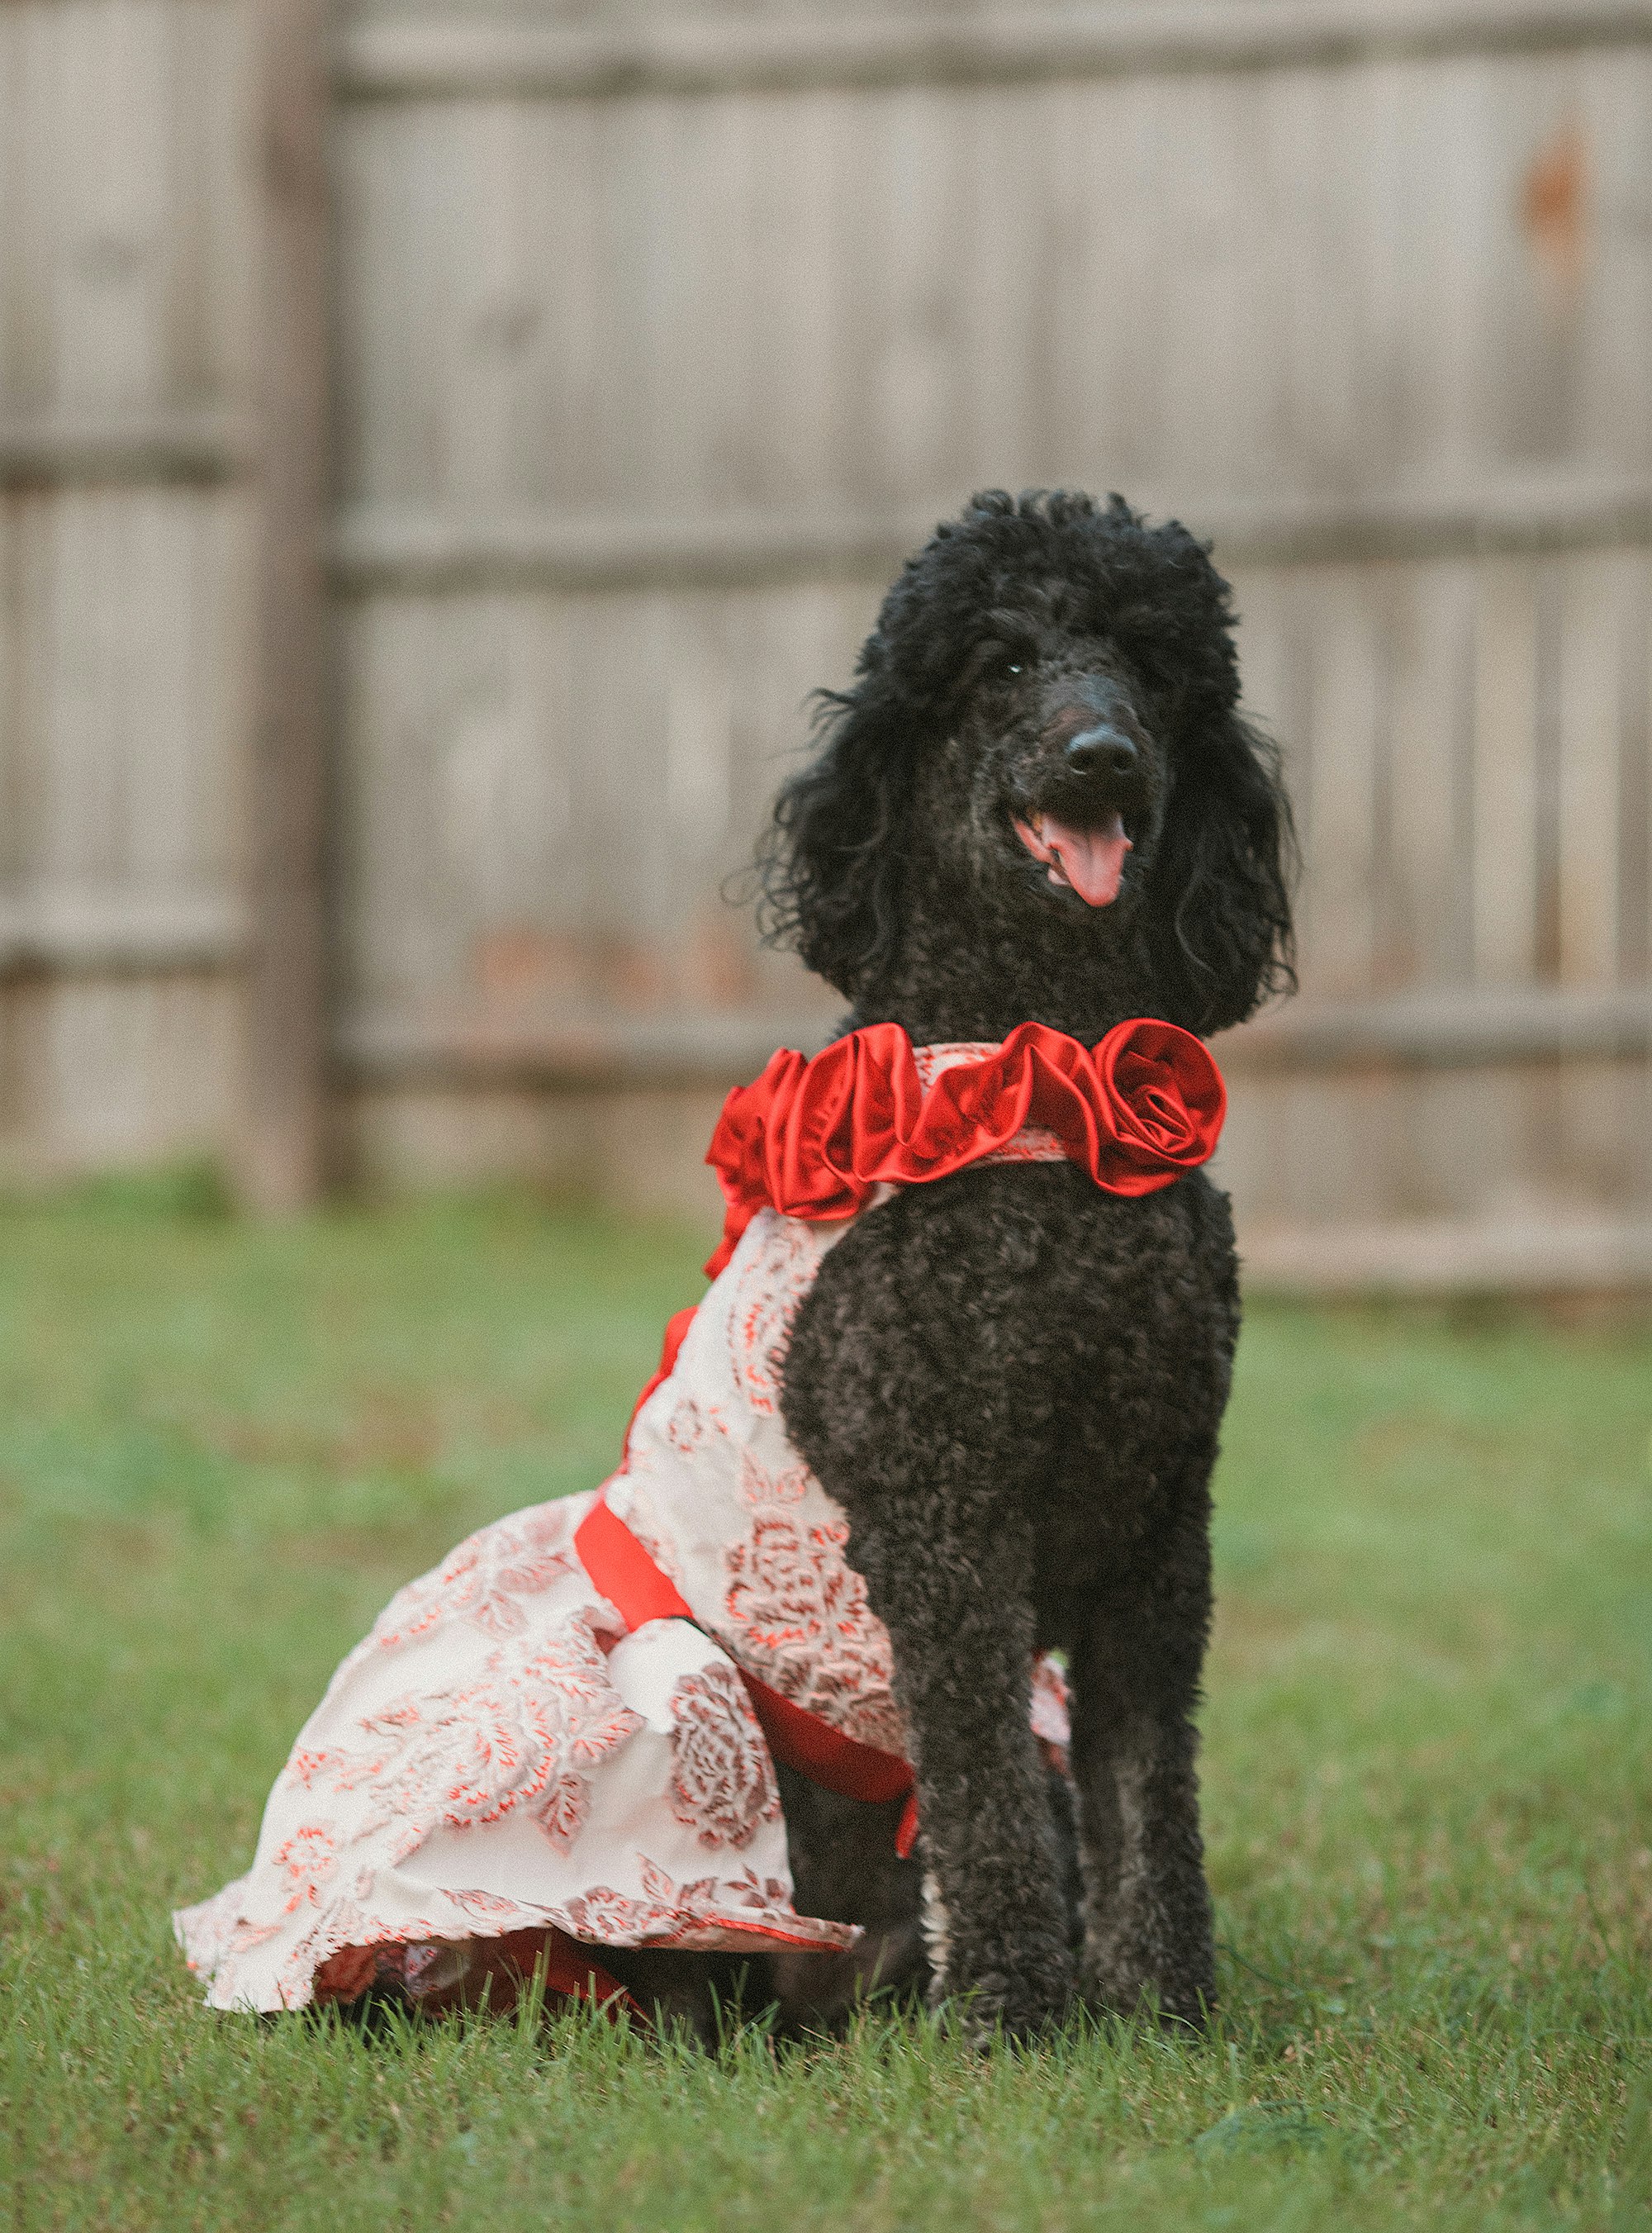 A black poodle wearing a dress poses in a sit.